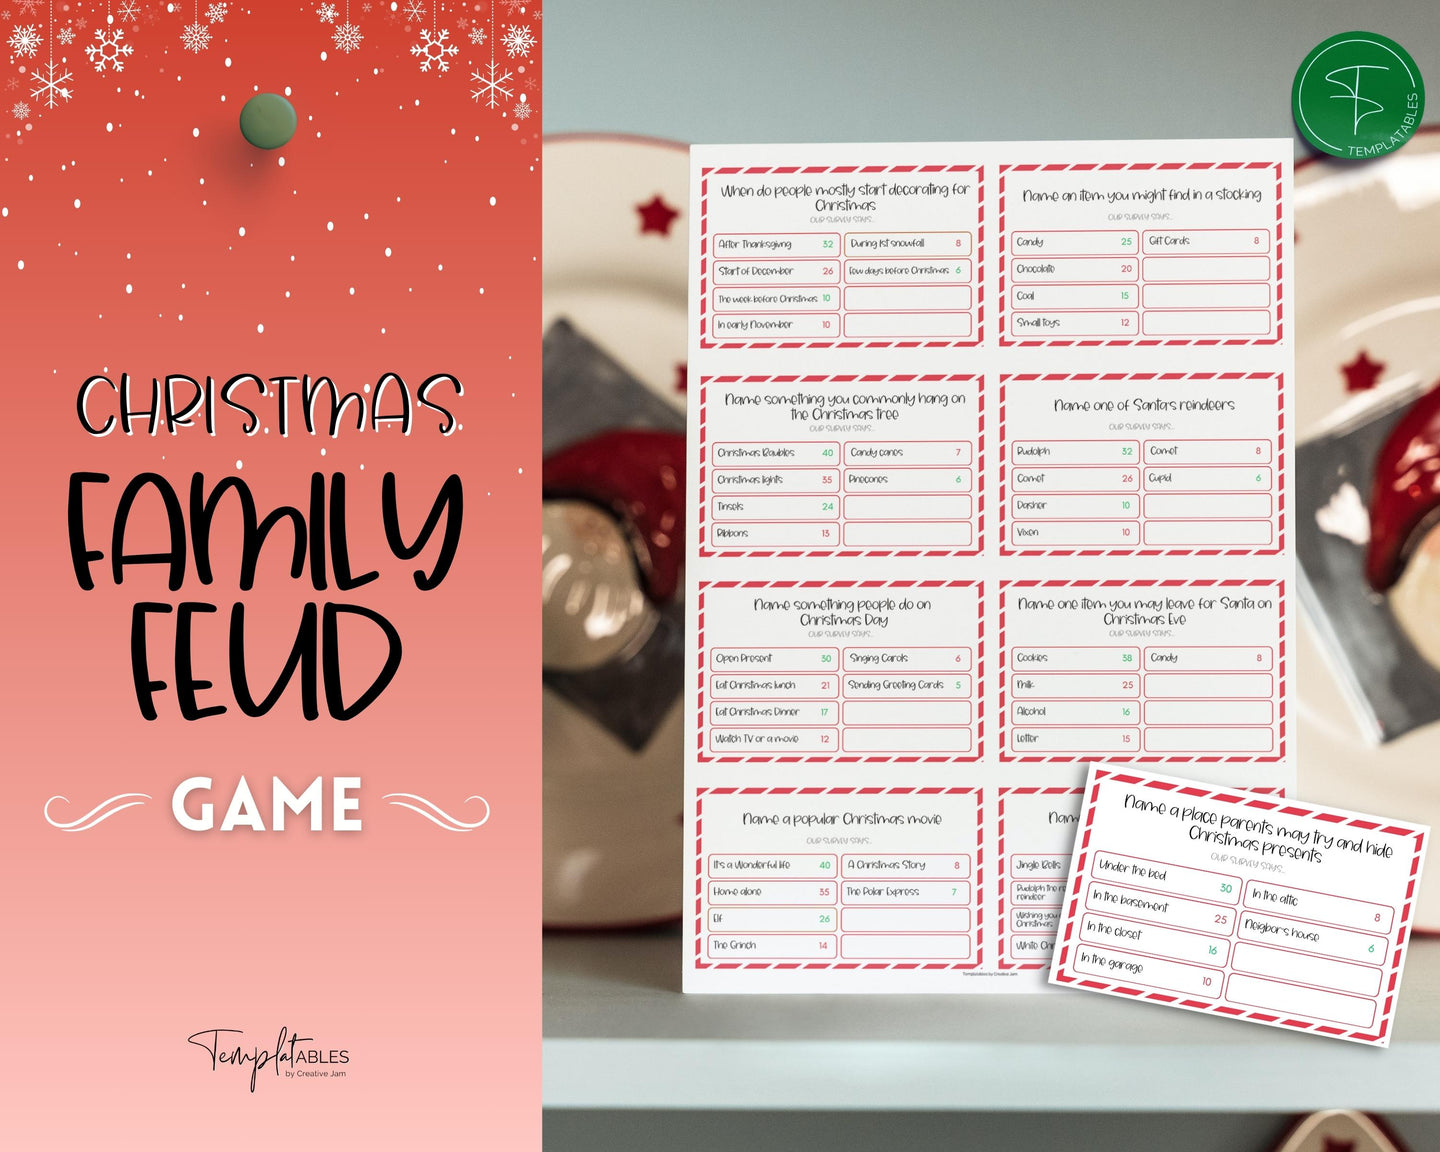 Christmas Family Feud Game | Holiday Family Quiz Game & Printable Xmas Party Game | Virtual Fun Activity for Kids Adults | Office & Trivia